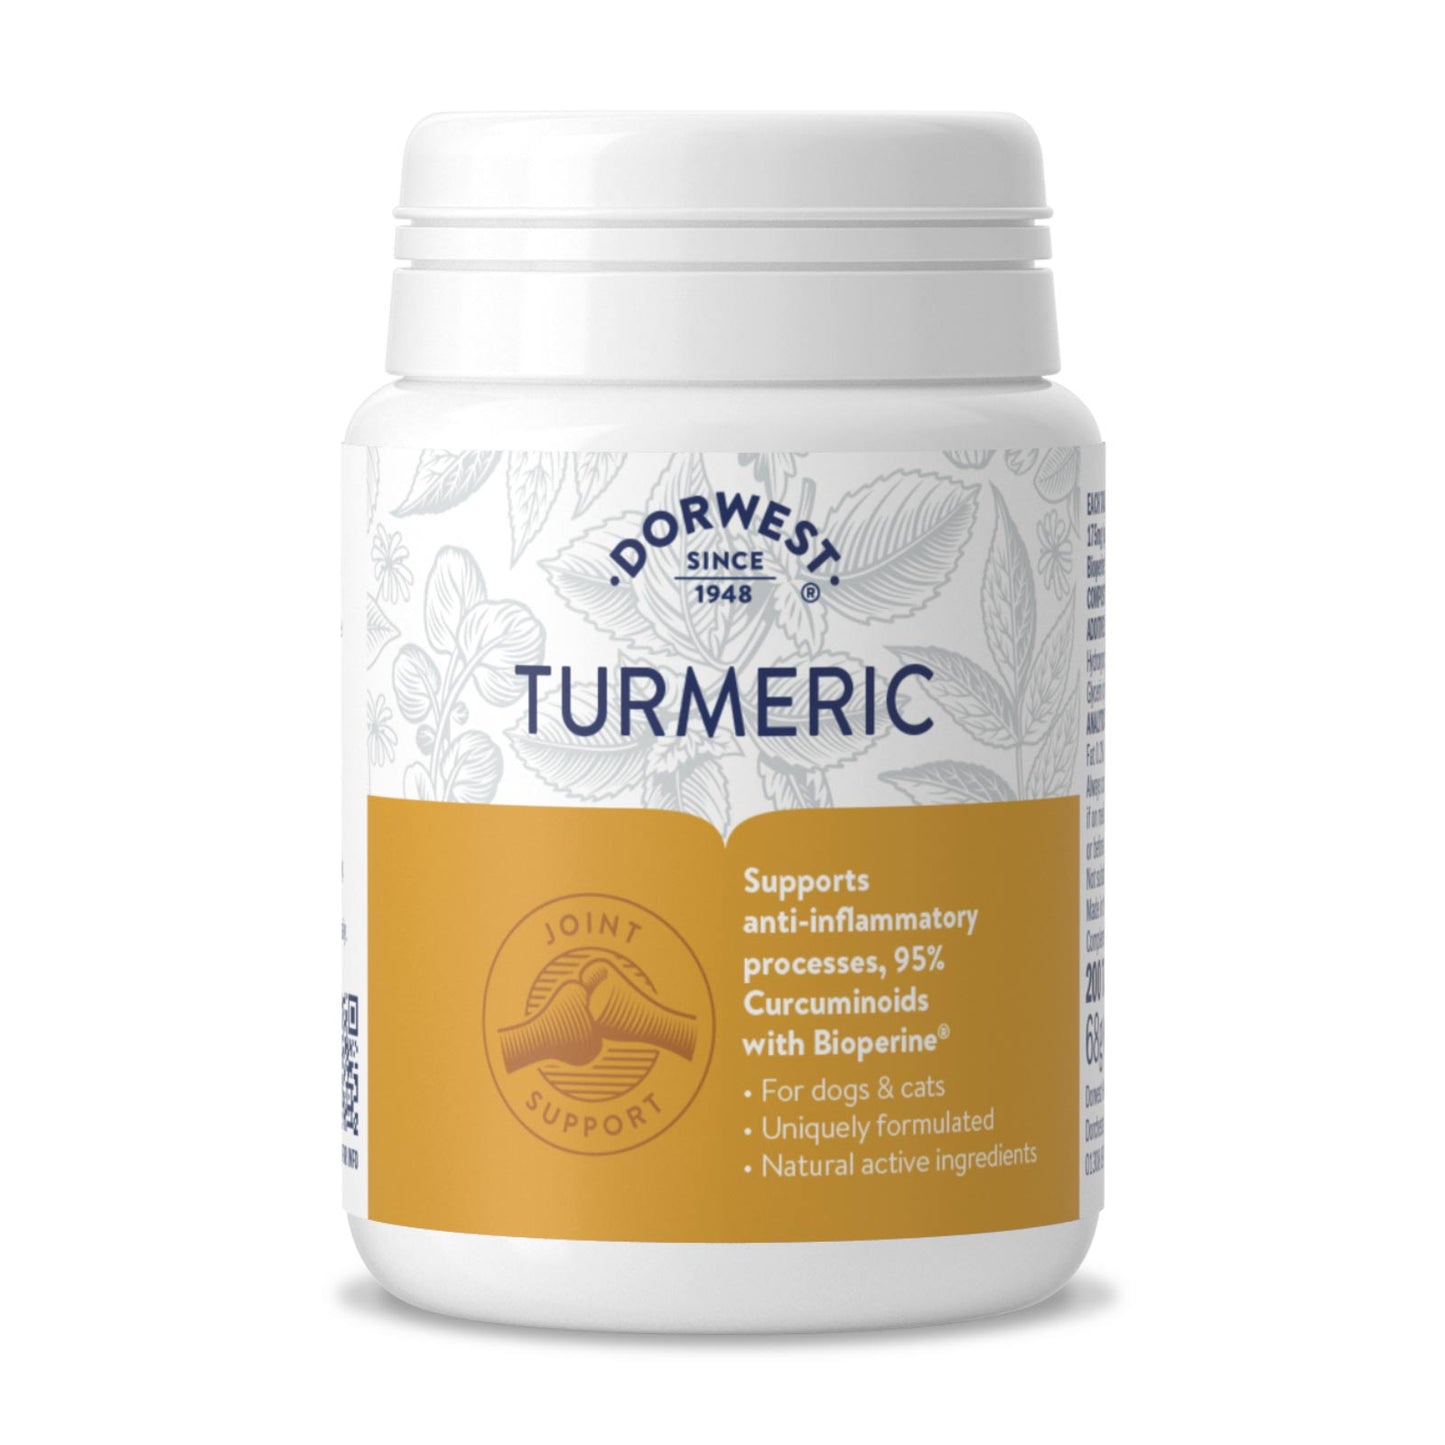 Dorwest Turmeric Tablets With Bioperine® For Dogs And Cats (Anti-Inflammatory)